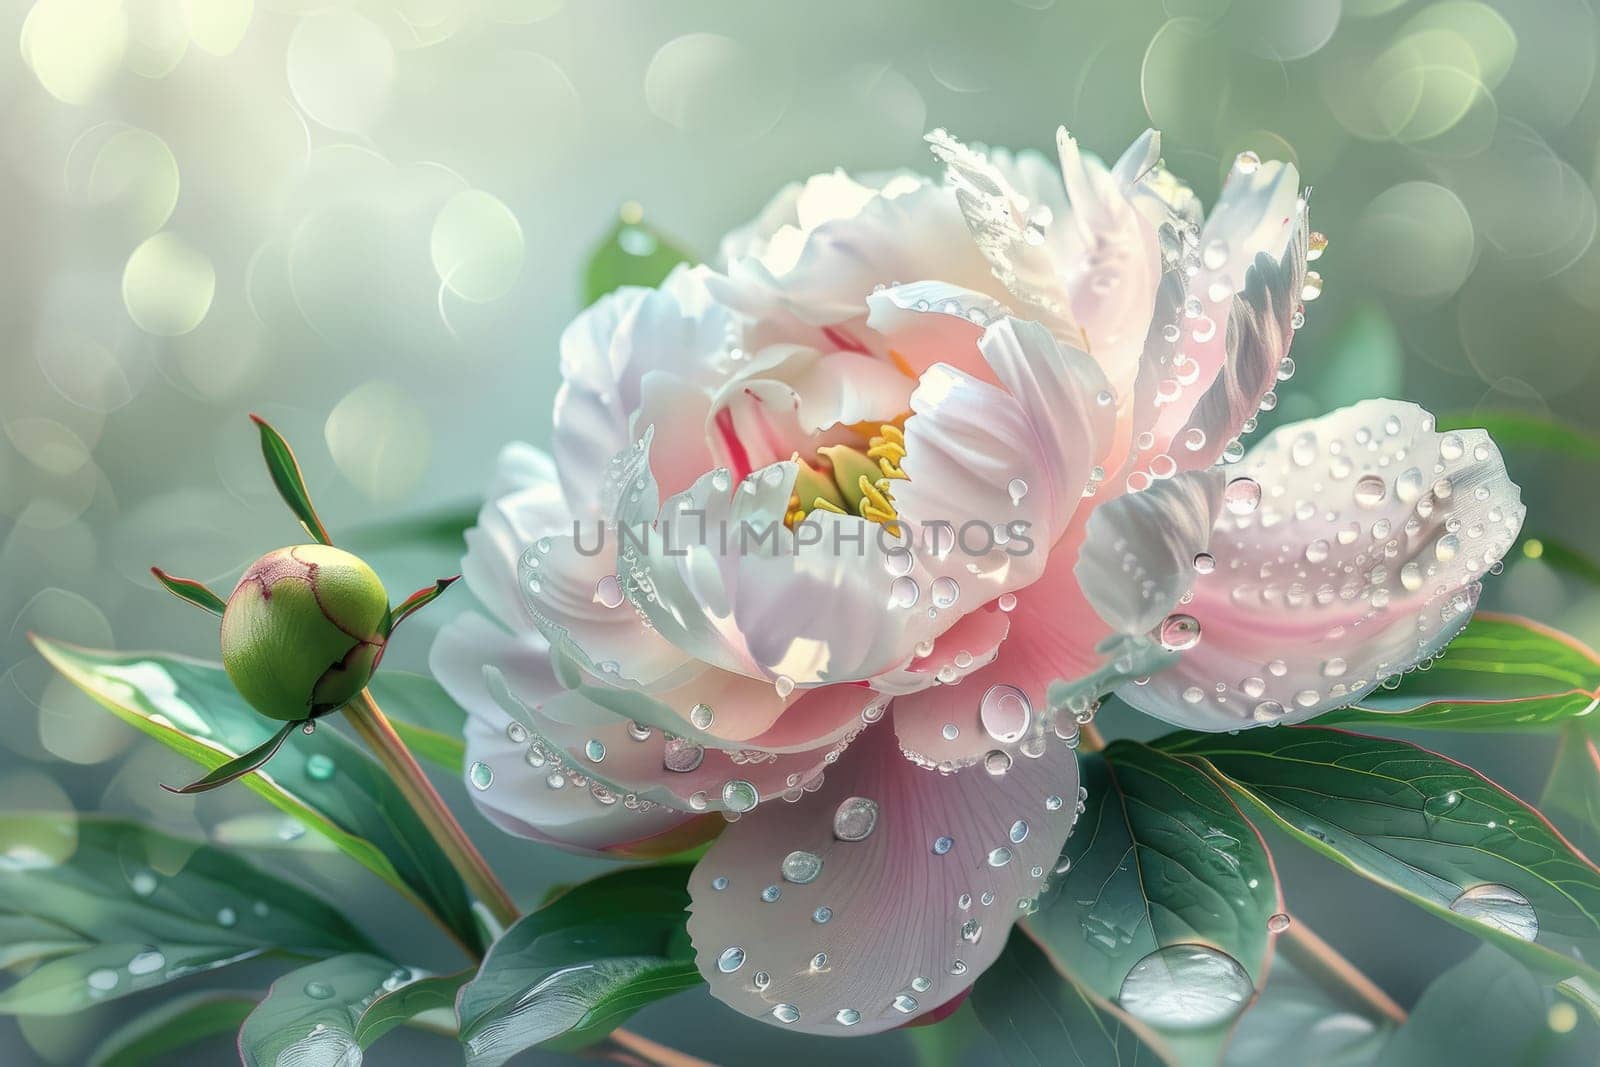 Close up view. Beautiful Peony isolated with drops of water on the petals. by Chawagen